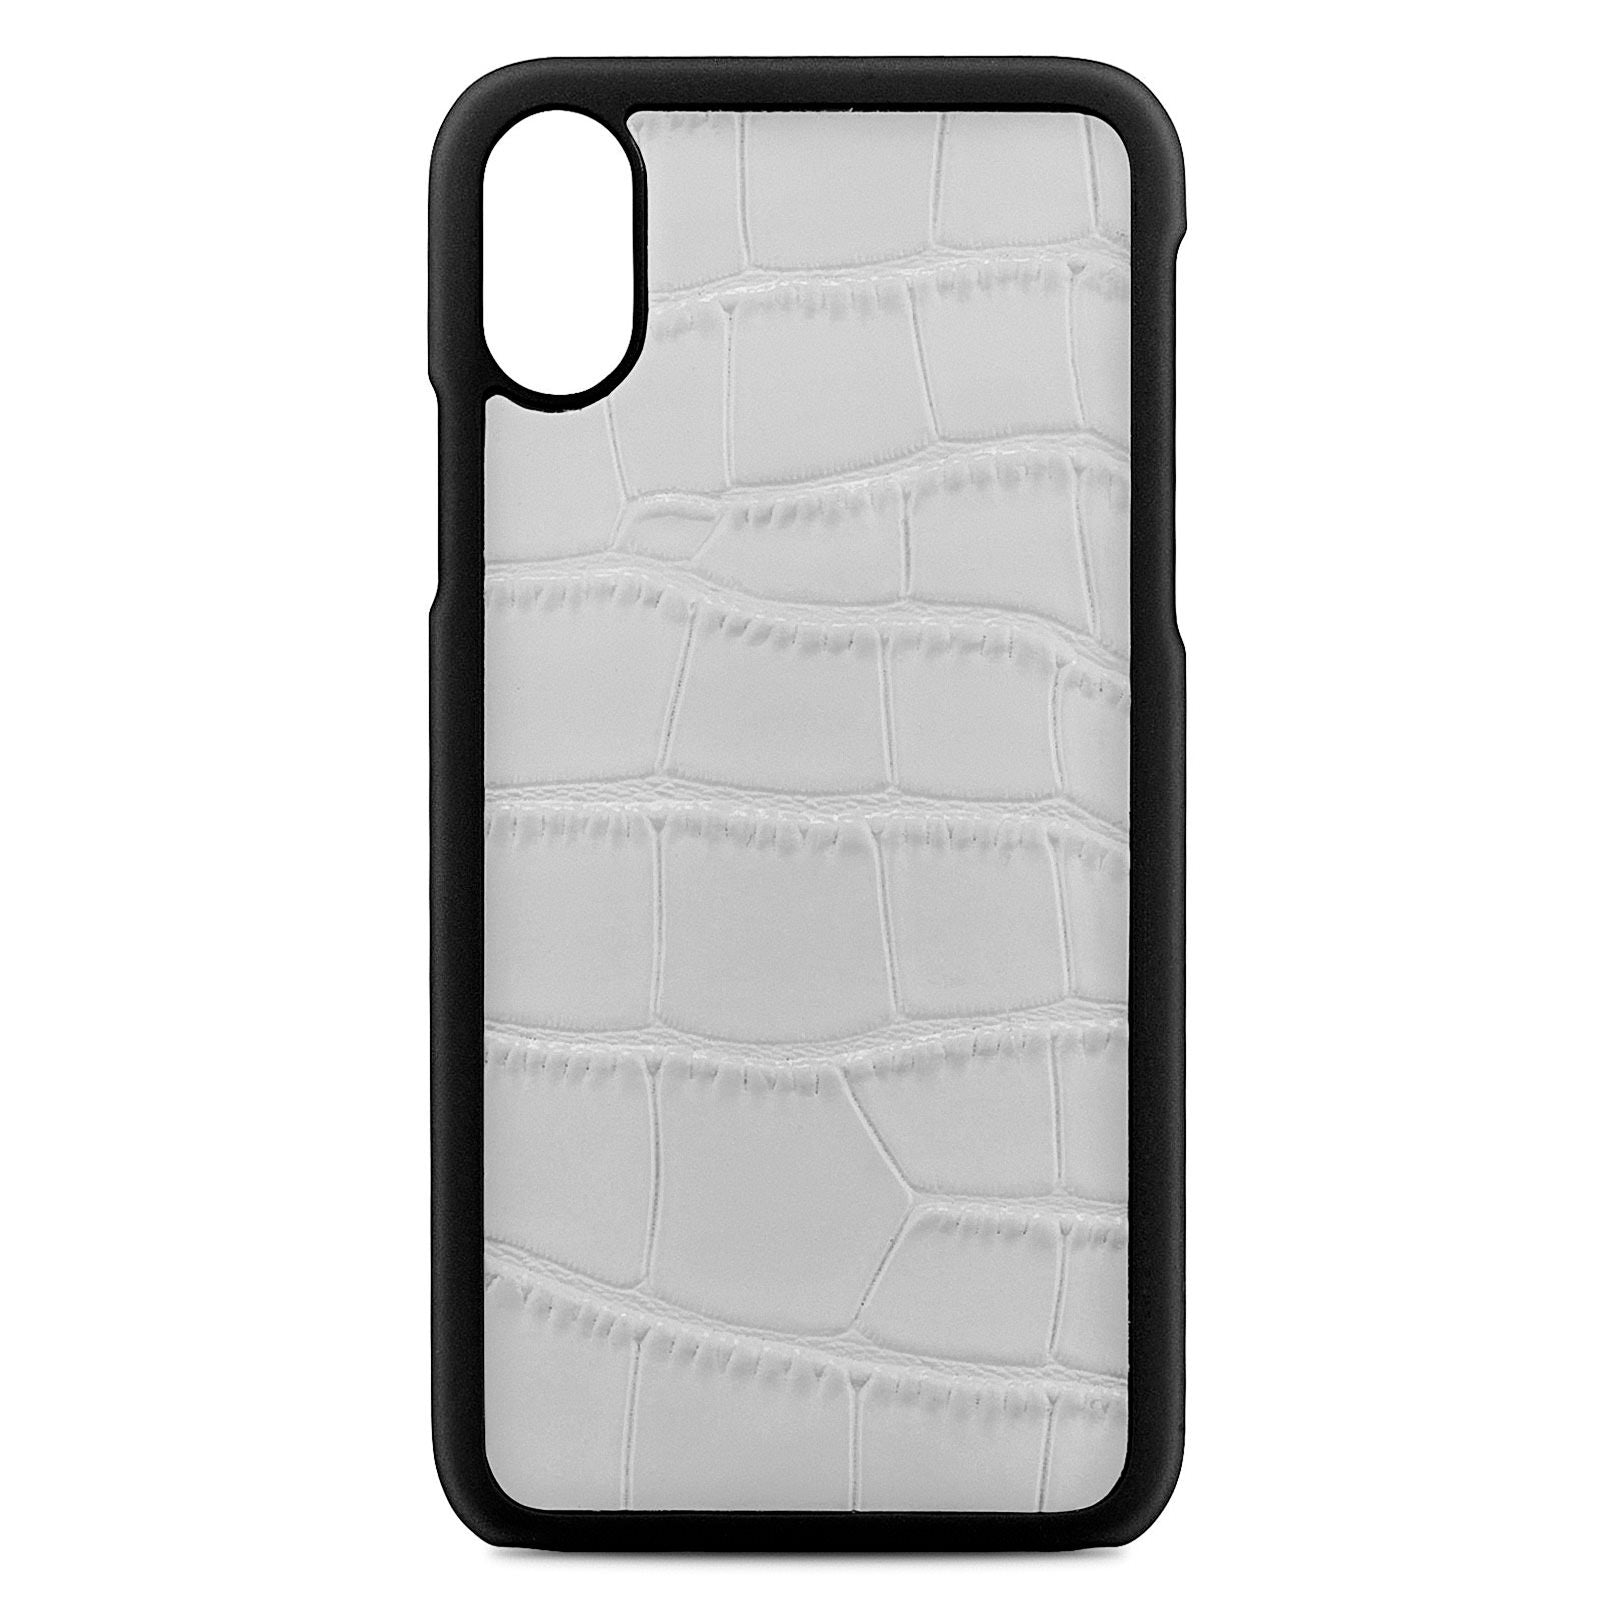 Blank Personalised Grey Croc Leather iPhone X Case